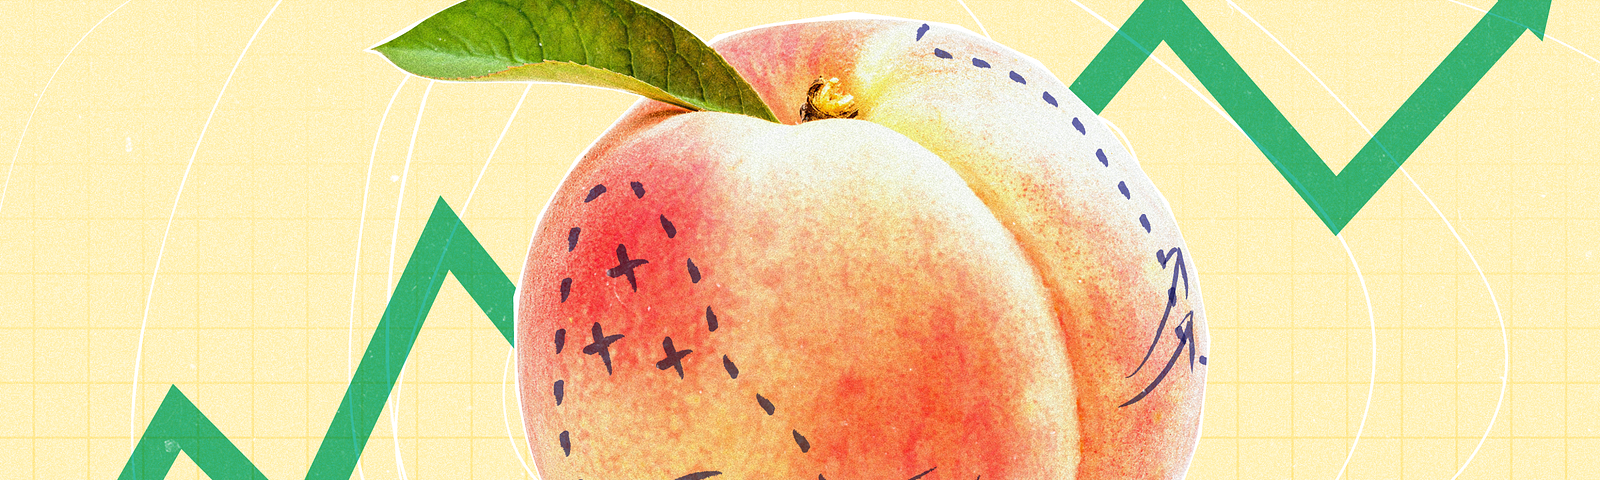 A graphic featuring a peach with marks on its sides.